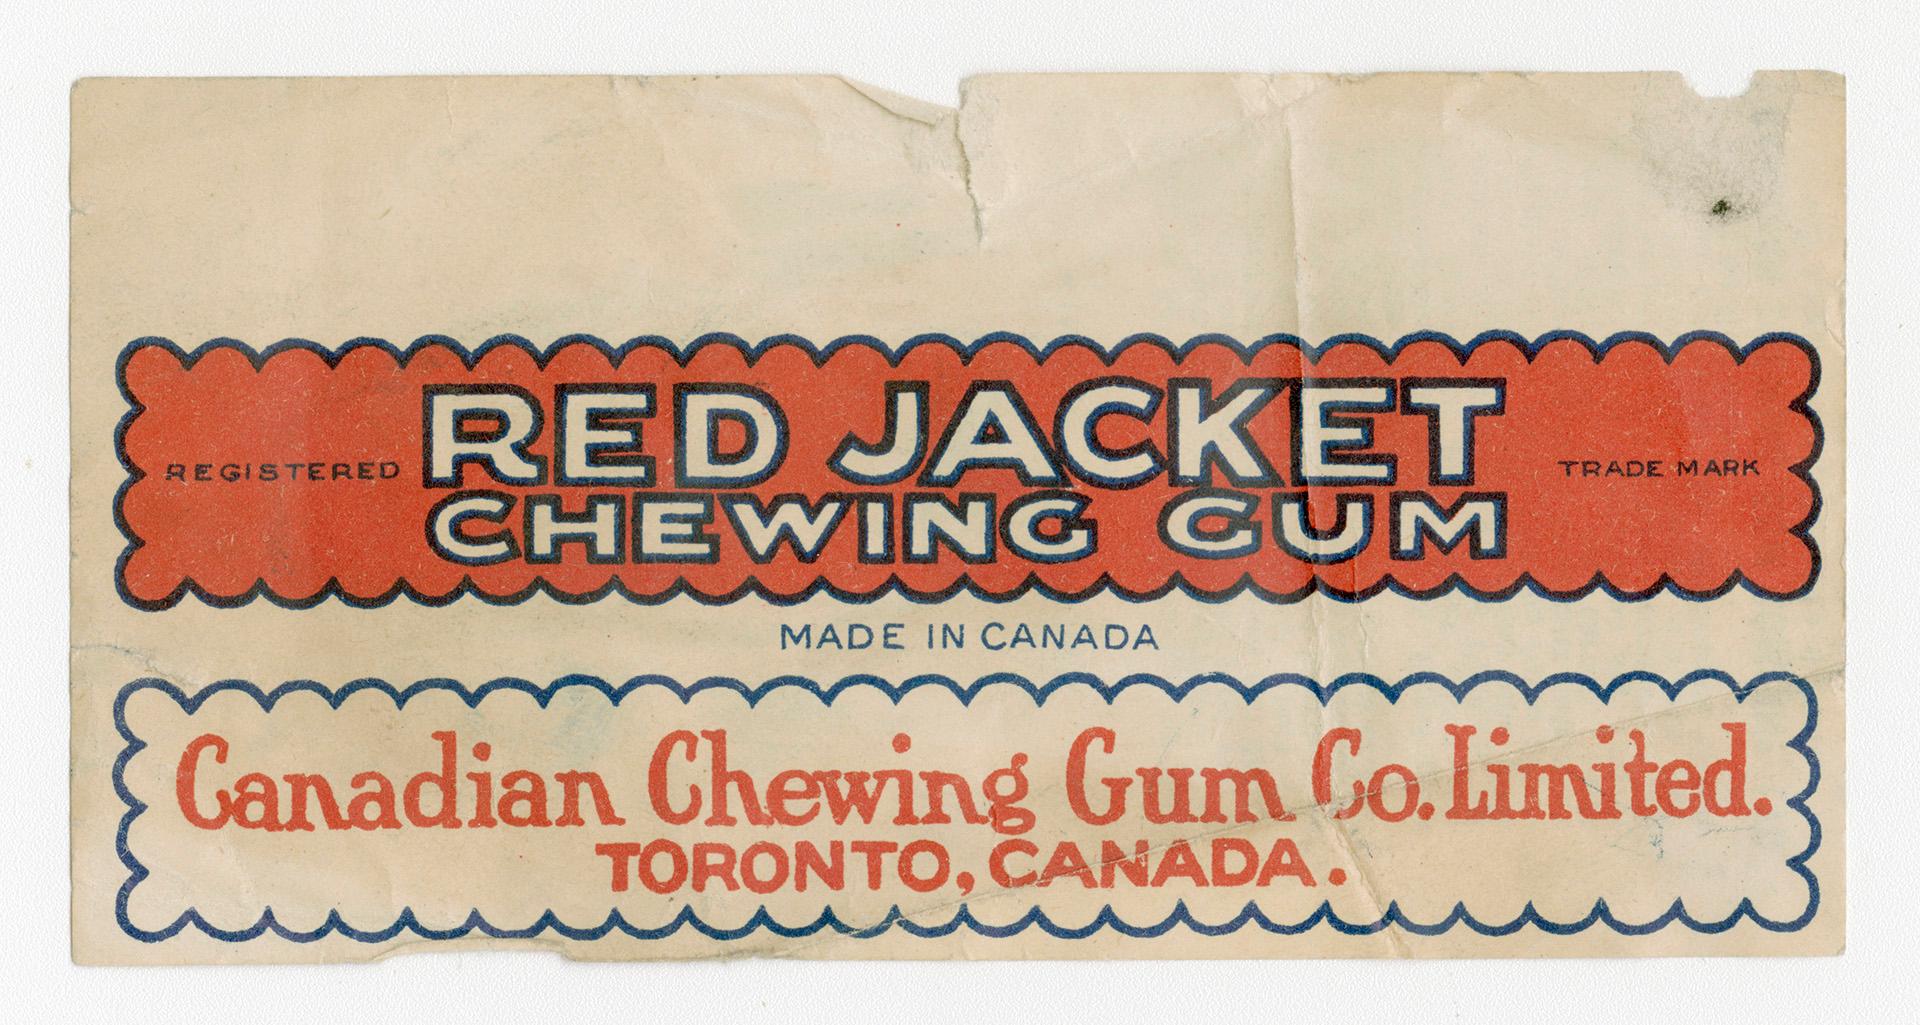 Red Jacket Chewing Gum, King of the Crows